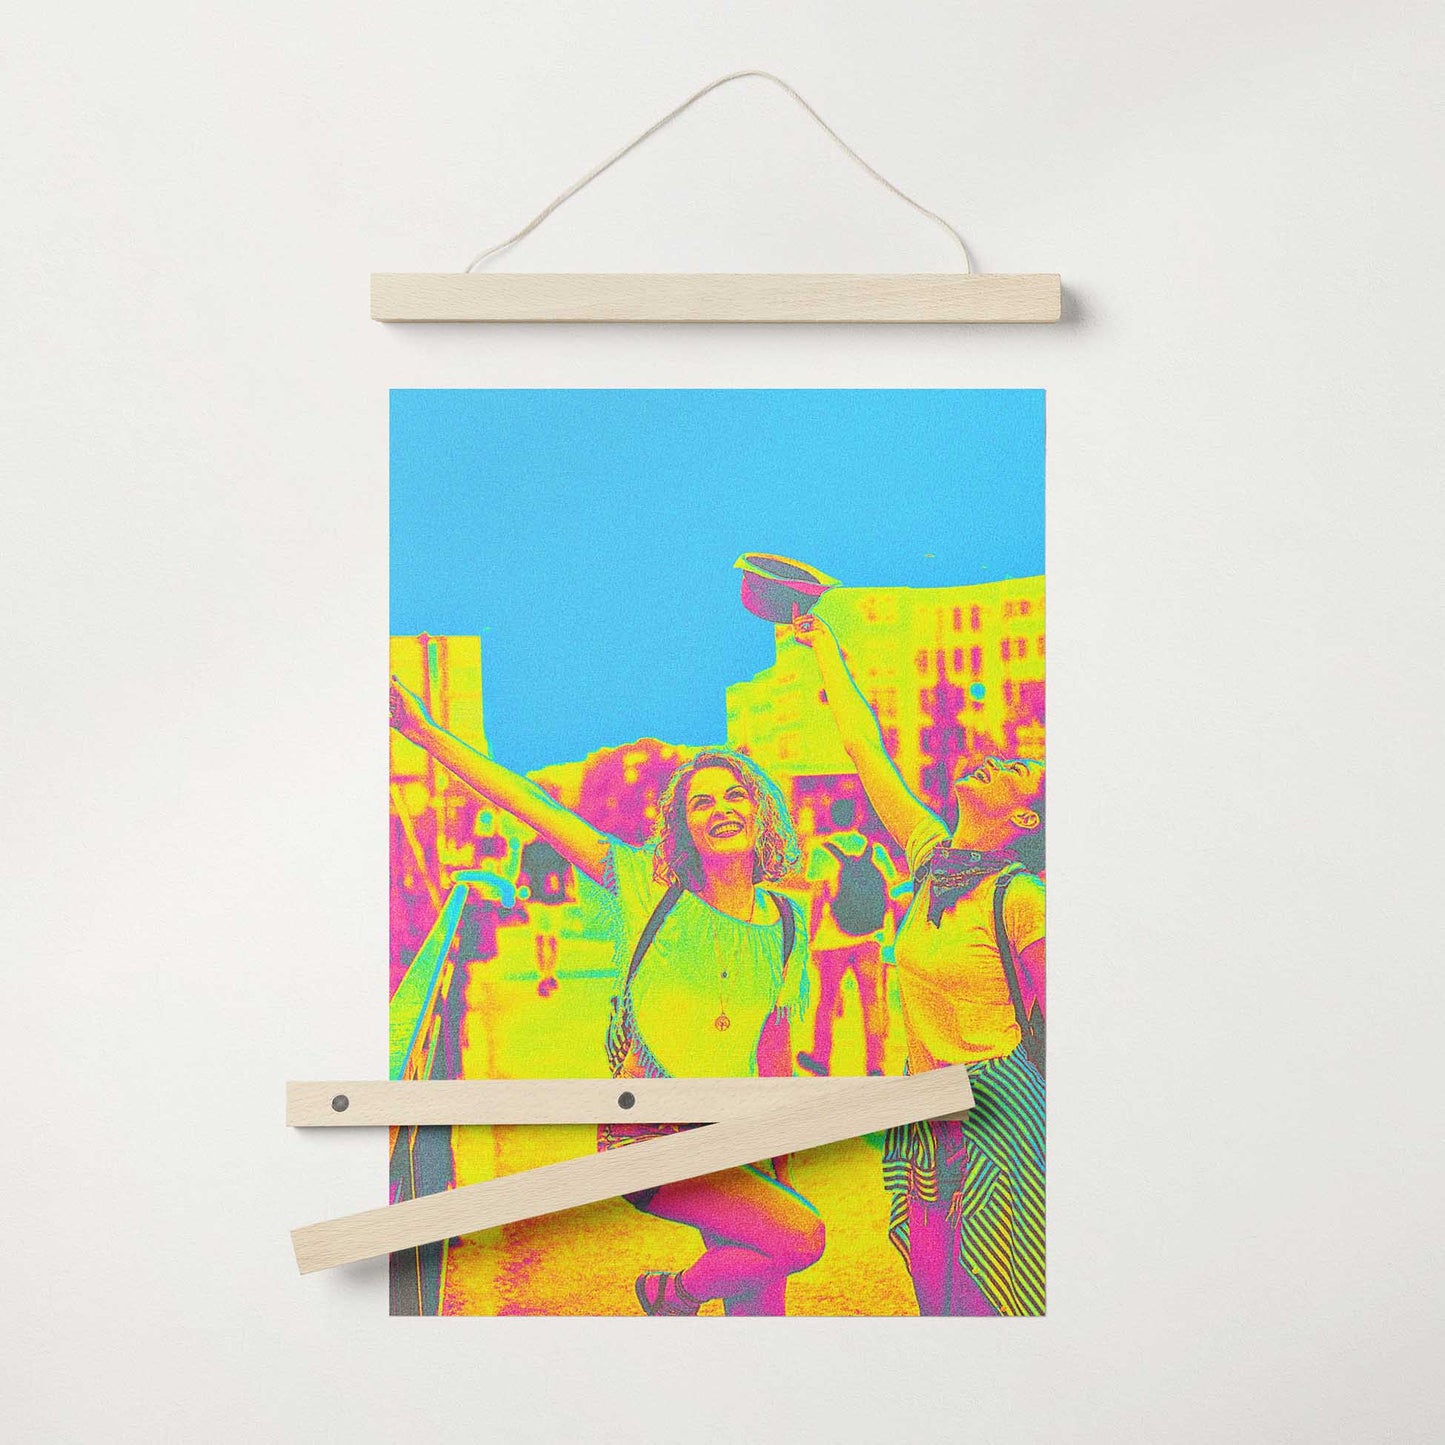 Elevate your space with our Personalised Acid Trip Poster Hanger. Featuring bold colors such as blue, pink, green, and yellow, this wall art embodies a cool and trendy vibe. Crafted on gallery-quality paper with a wooden magnetic frame